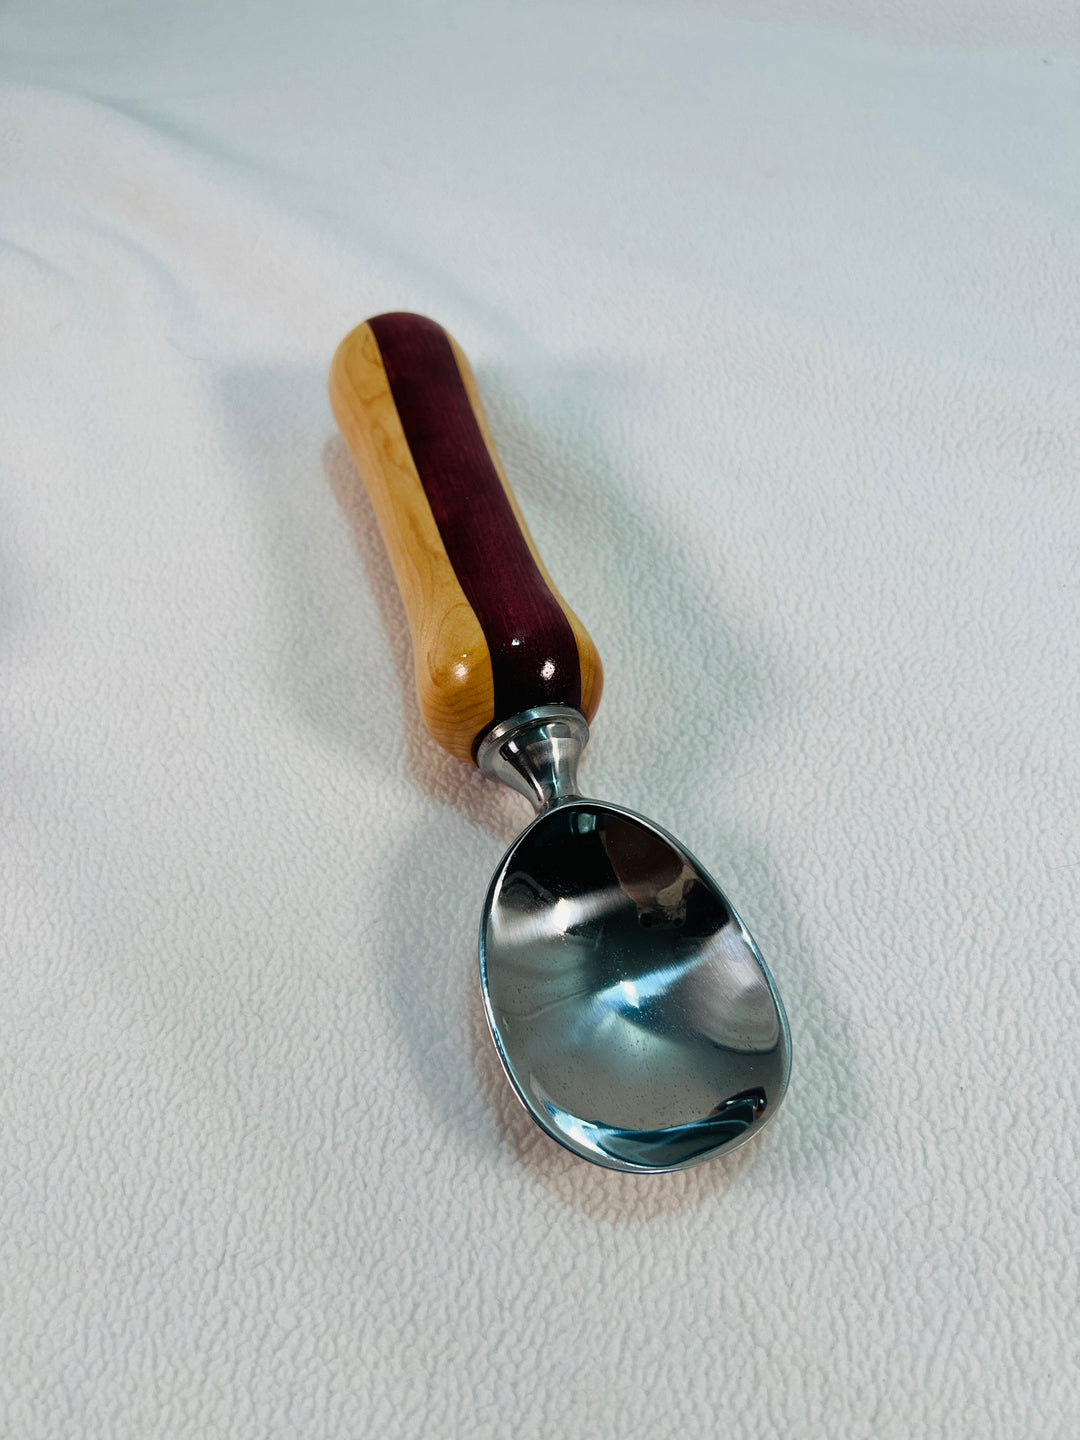 Ice Cream Scoop Purple Heart and Maple Handle with Paddle Stainless Steel Scoop